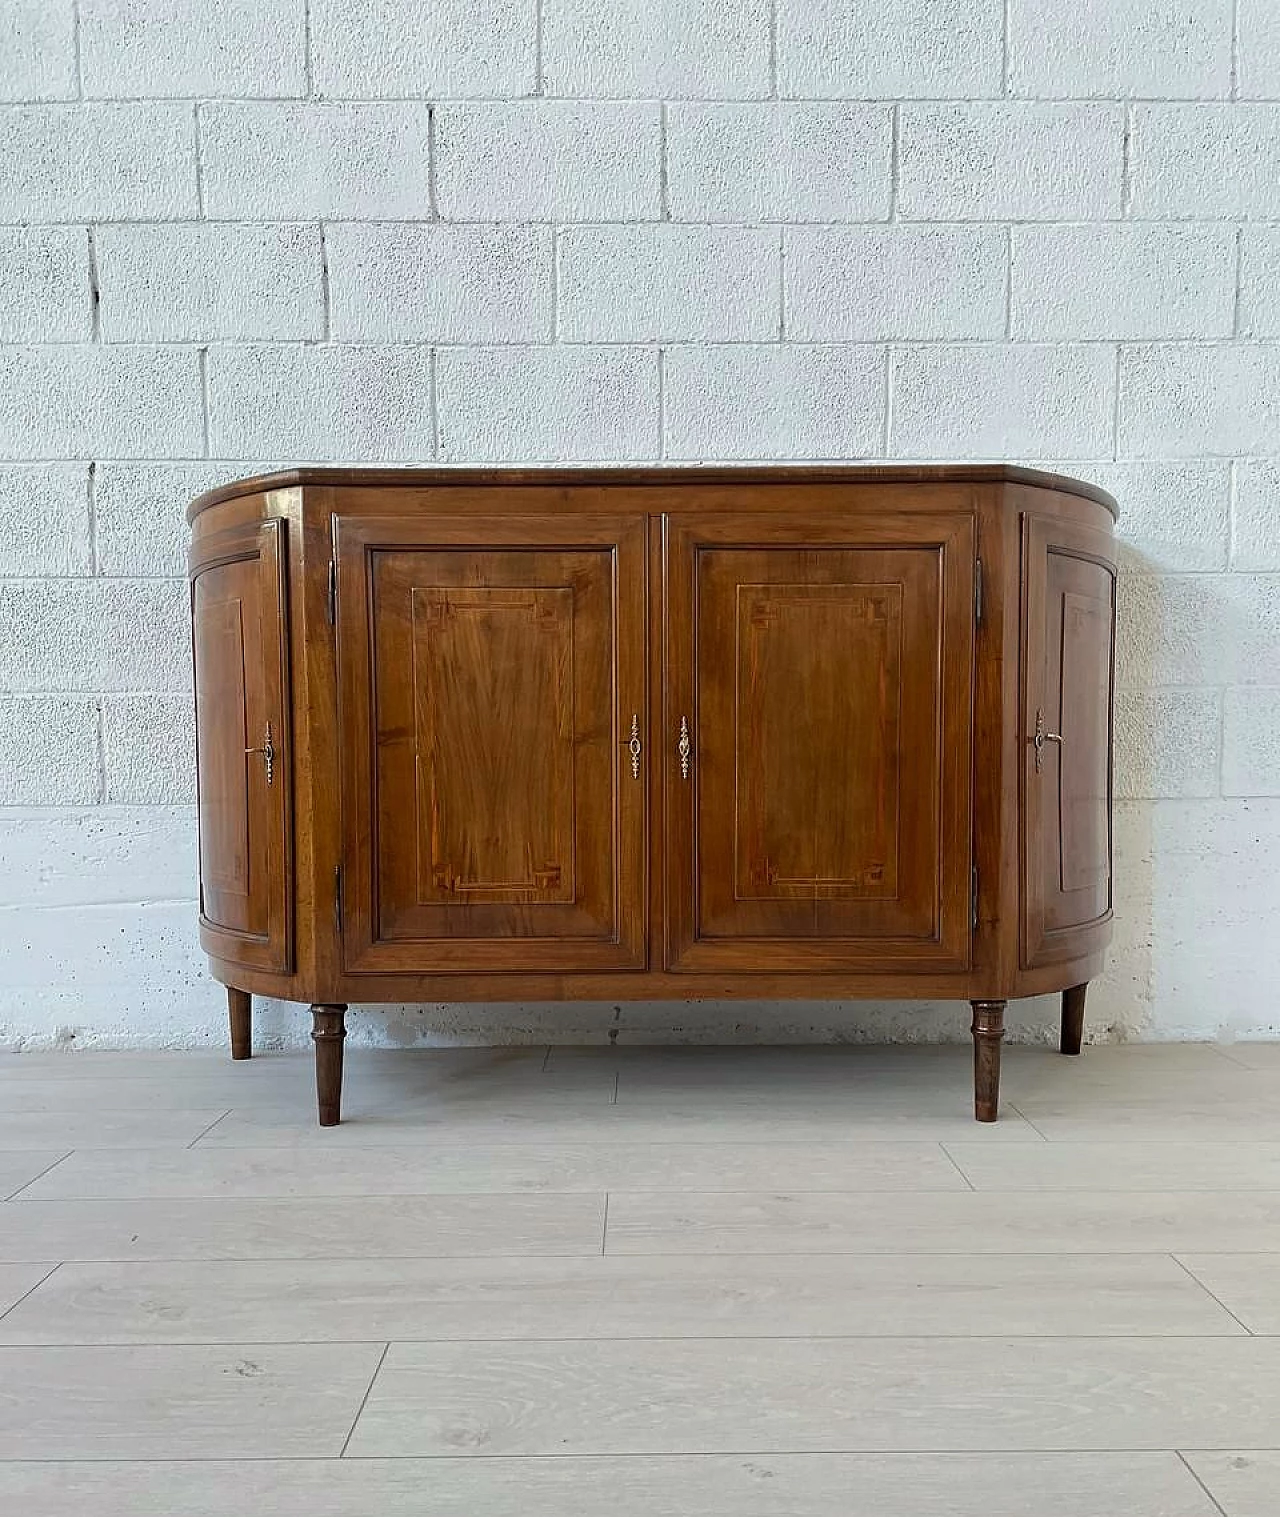 Walnut sideboard with inlaid doors, late 18th century 1